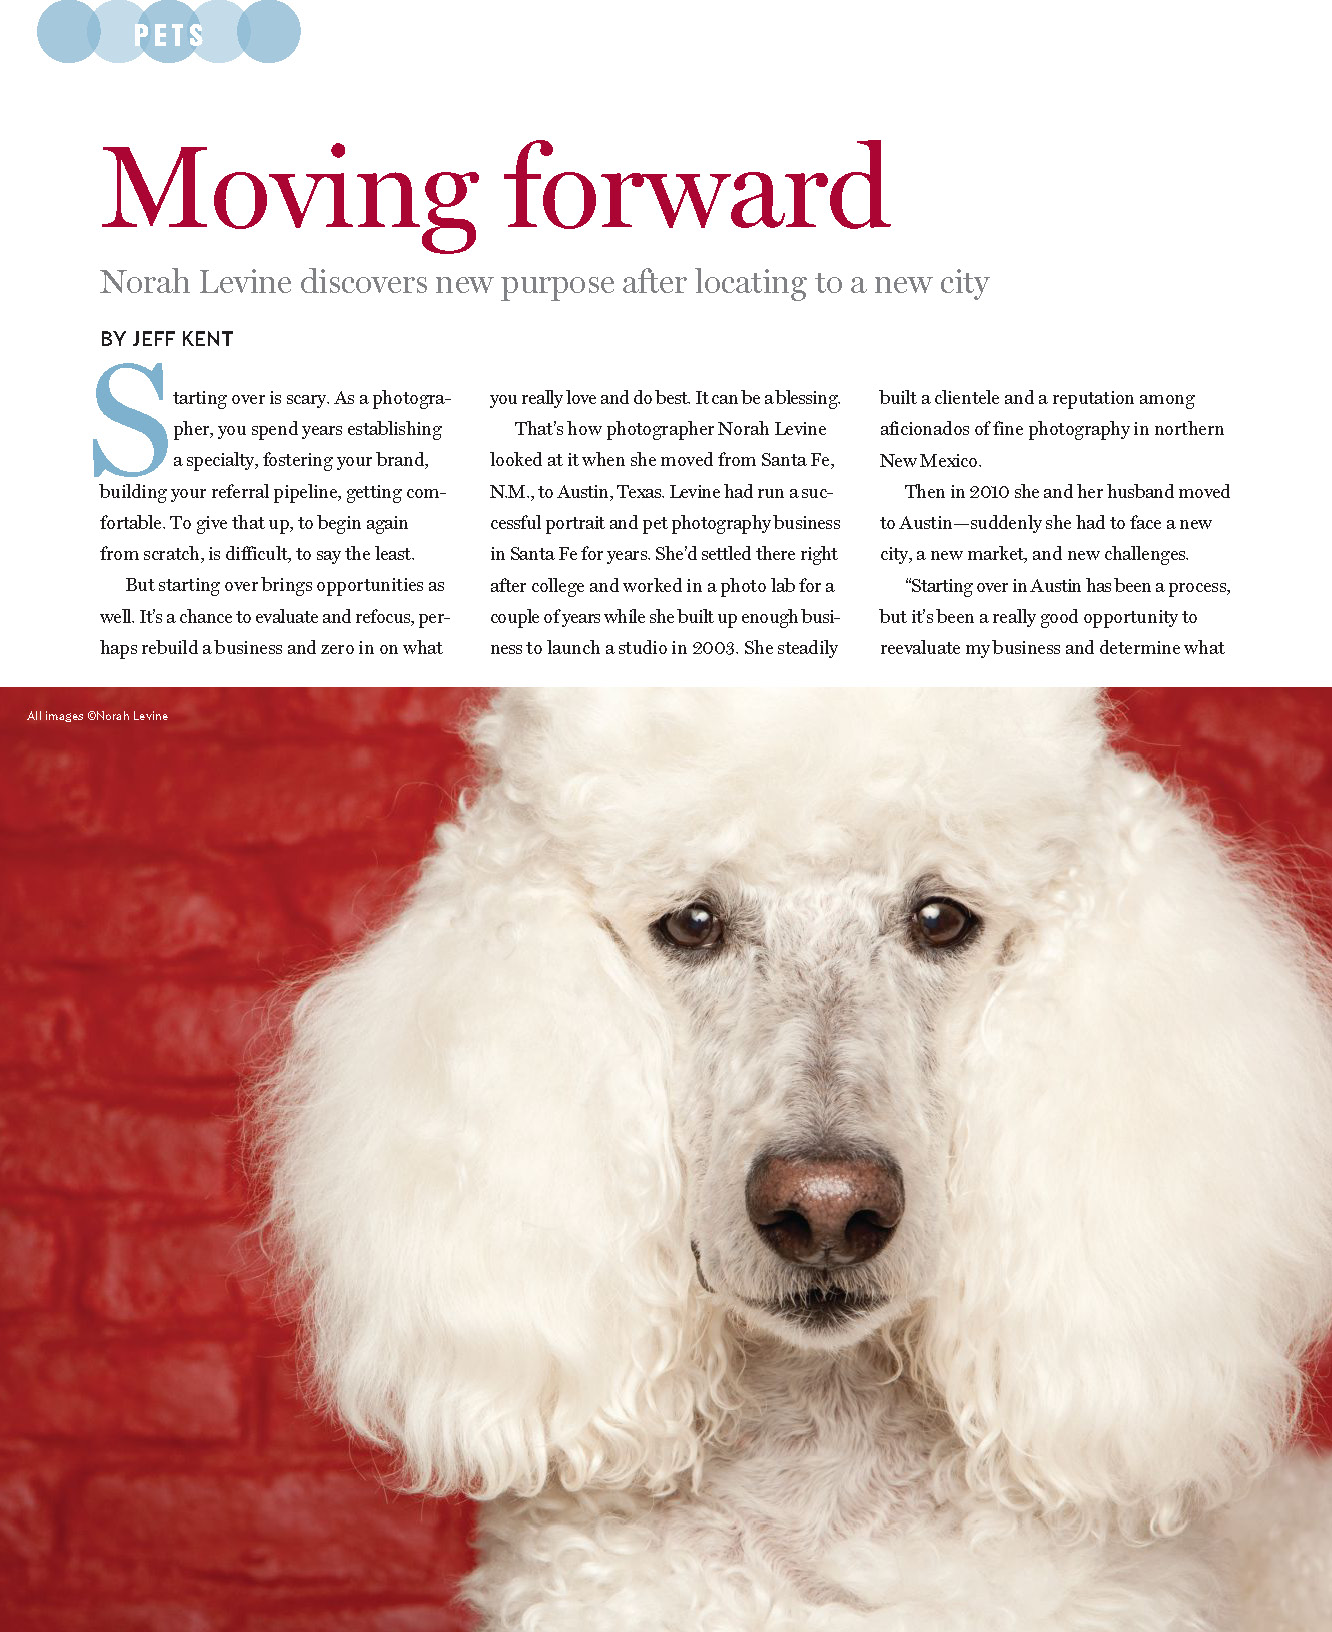 Pet Photography Article